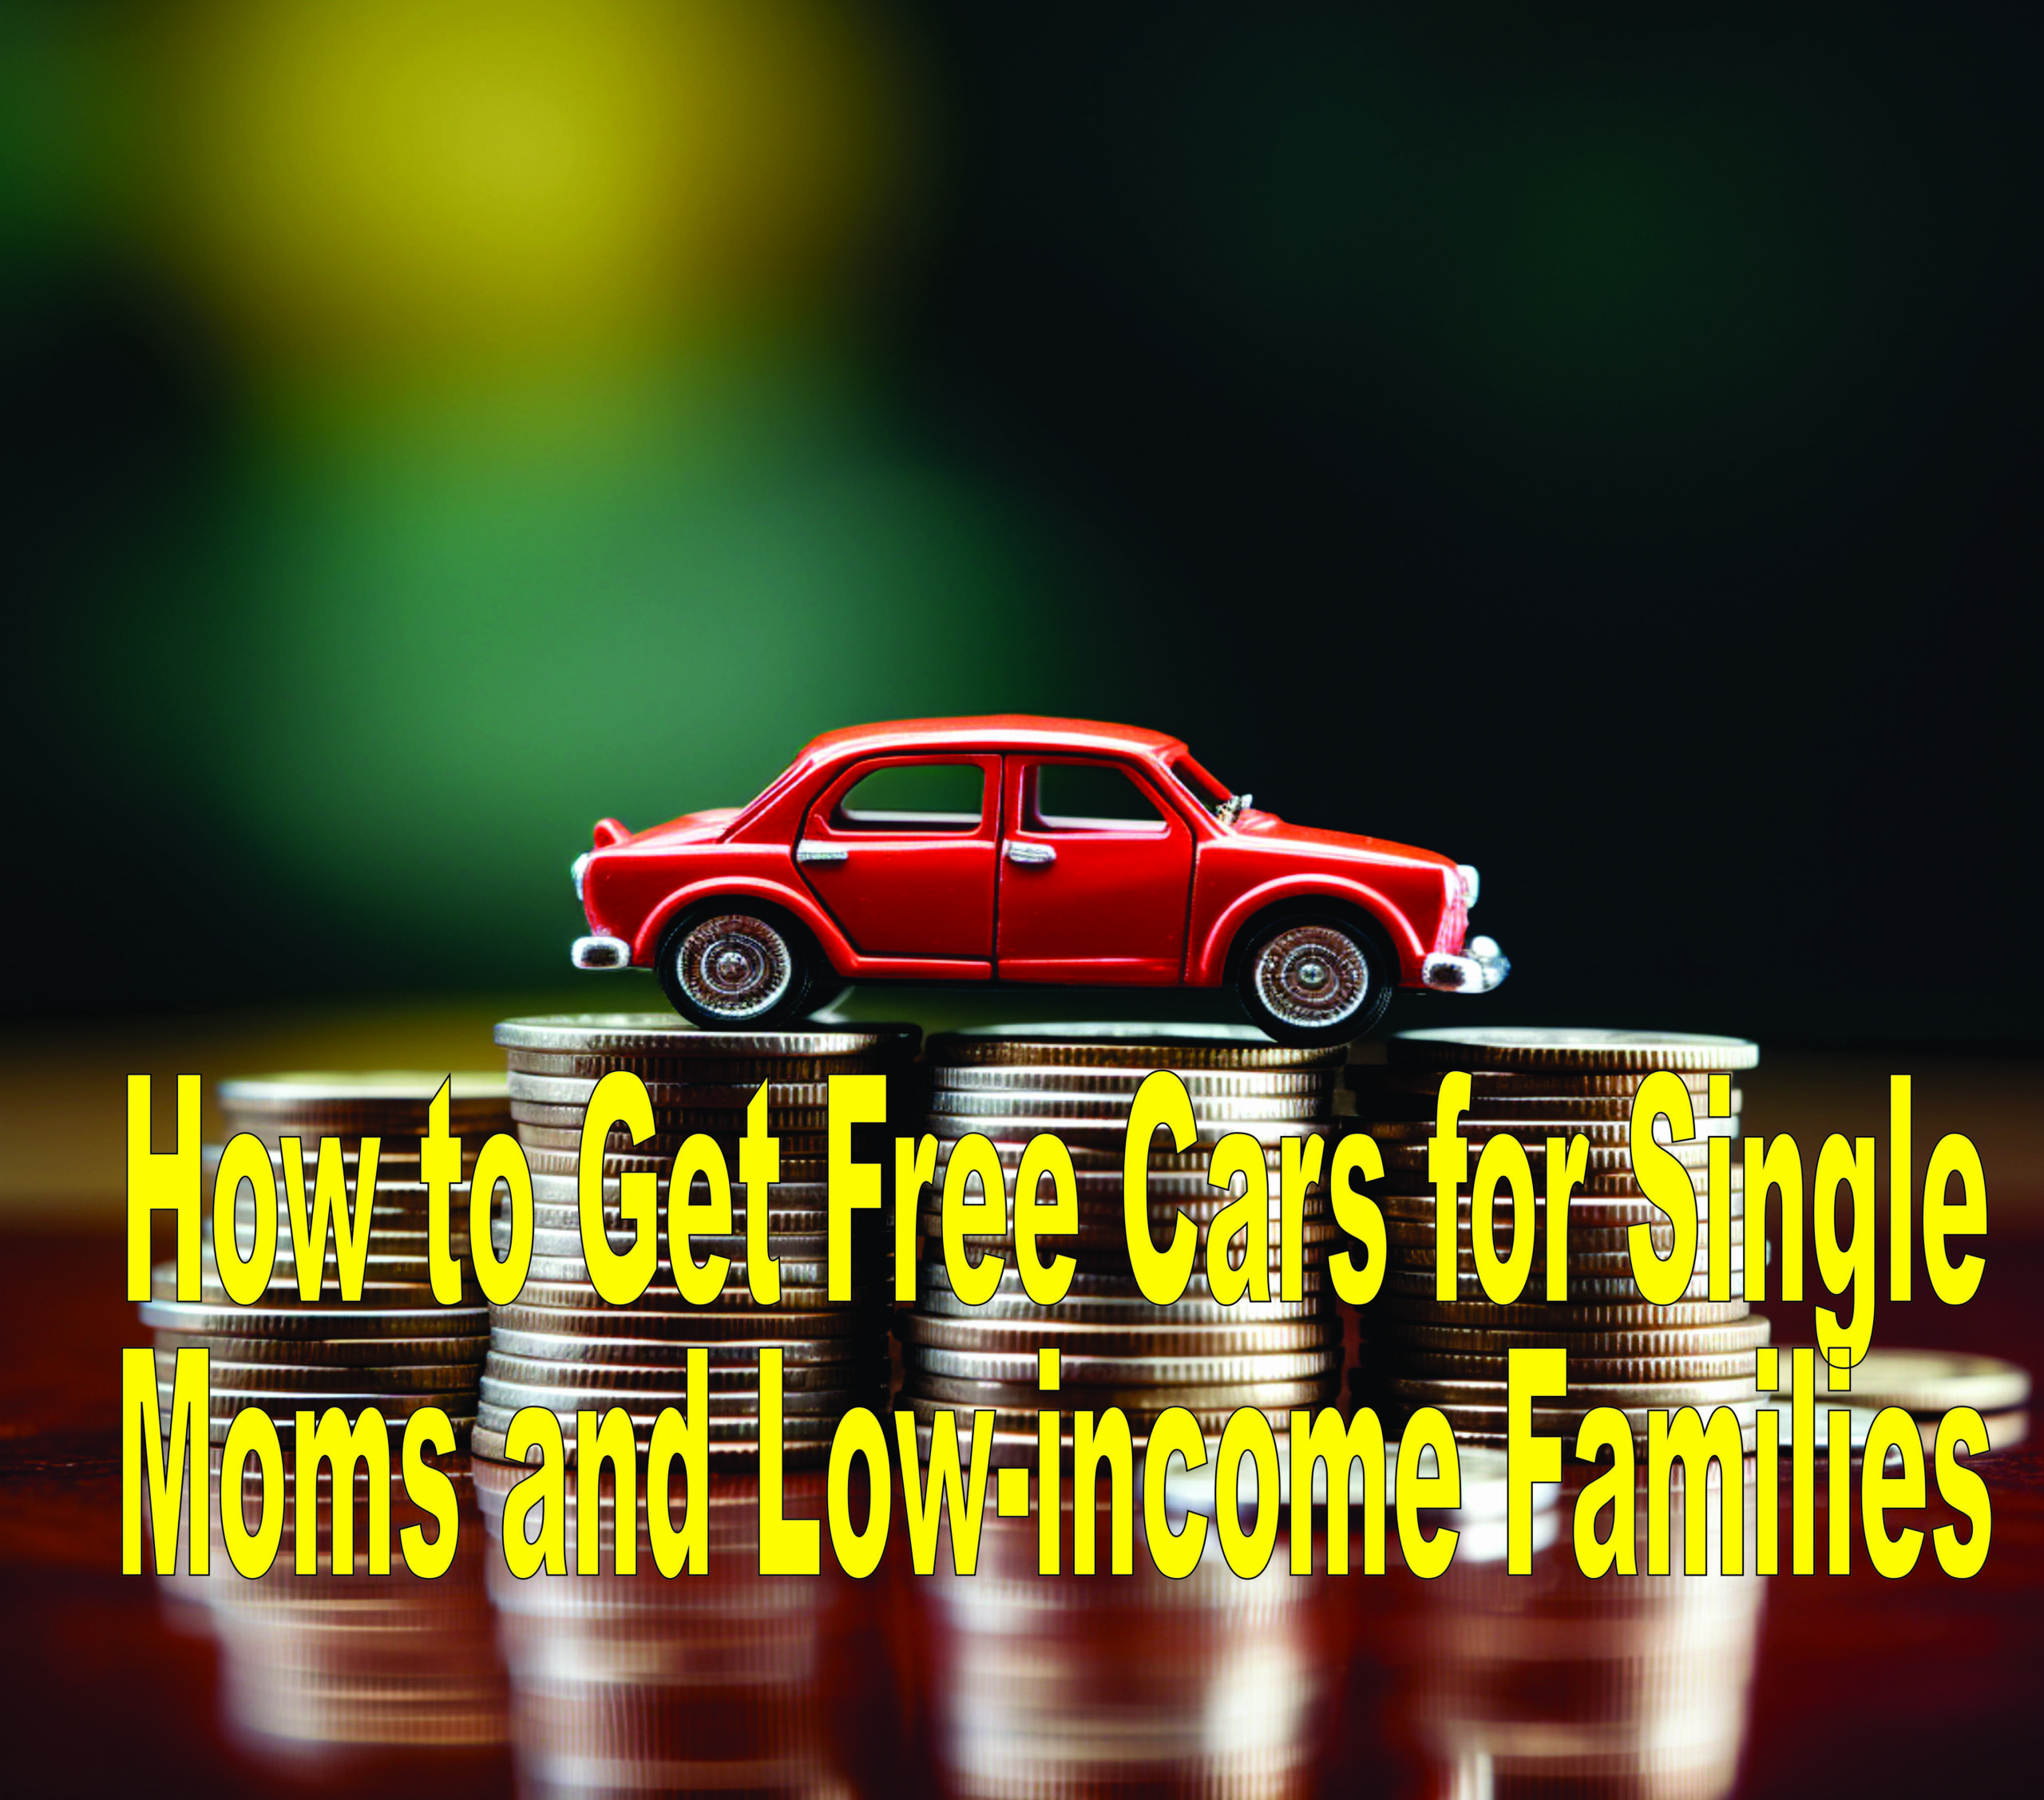 How To Get Free Cars For Single Moms And Low Income Families